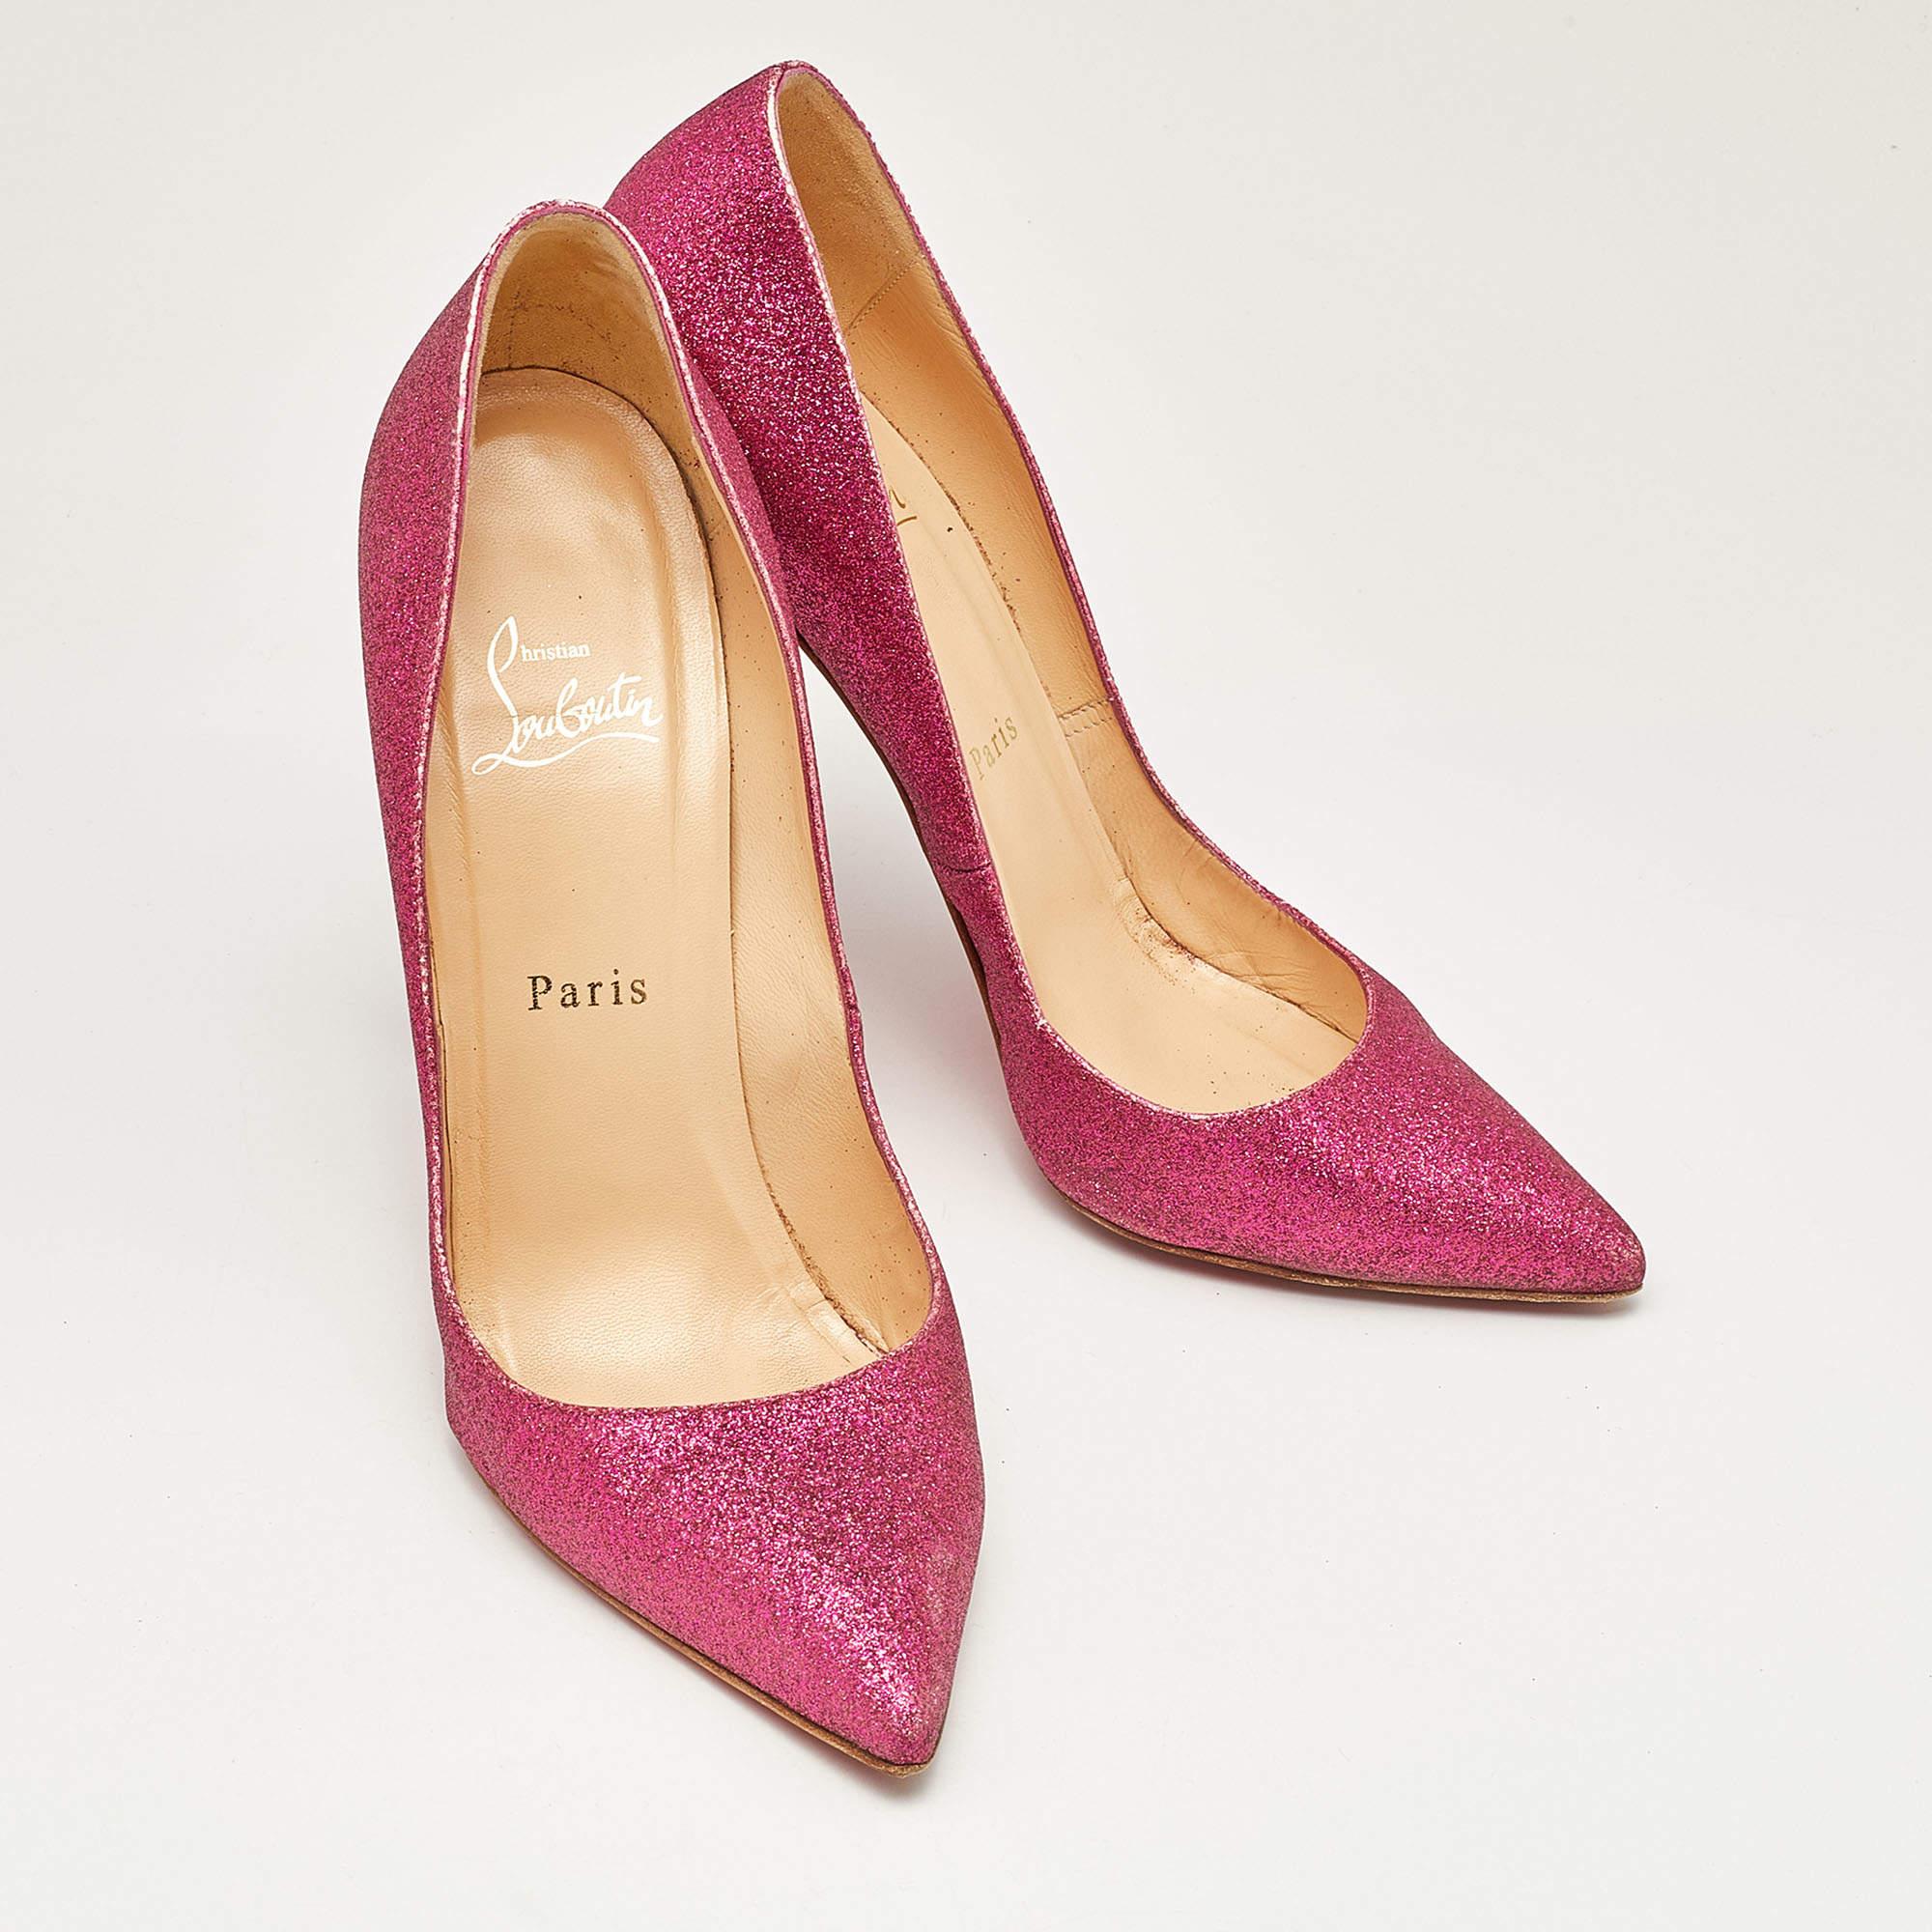 Christian Louboutin Pink Glitter Pigalle Pumps Size 39.5 1